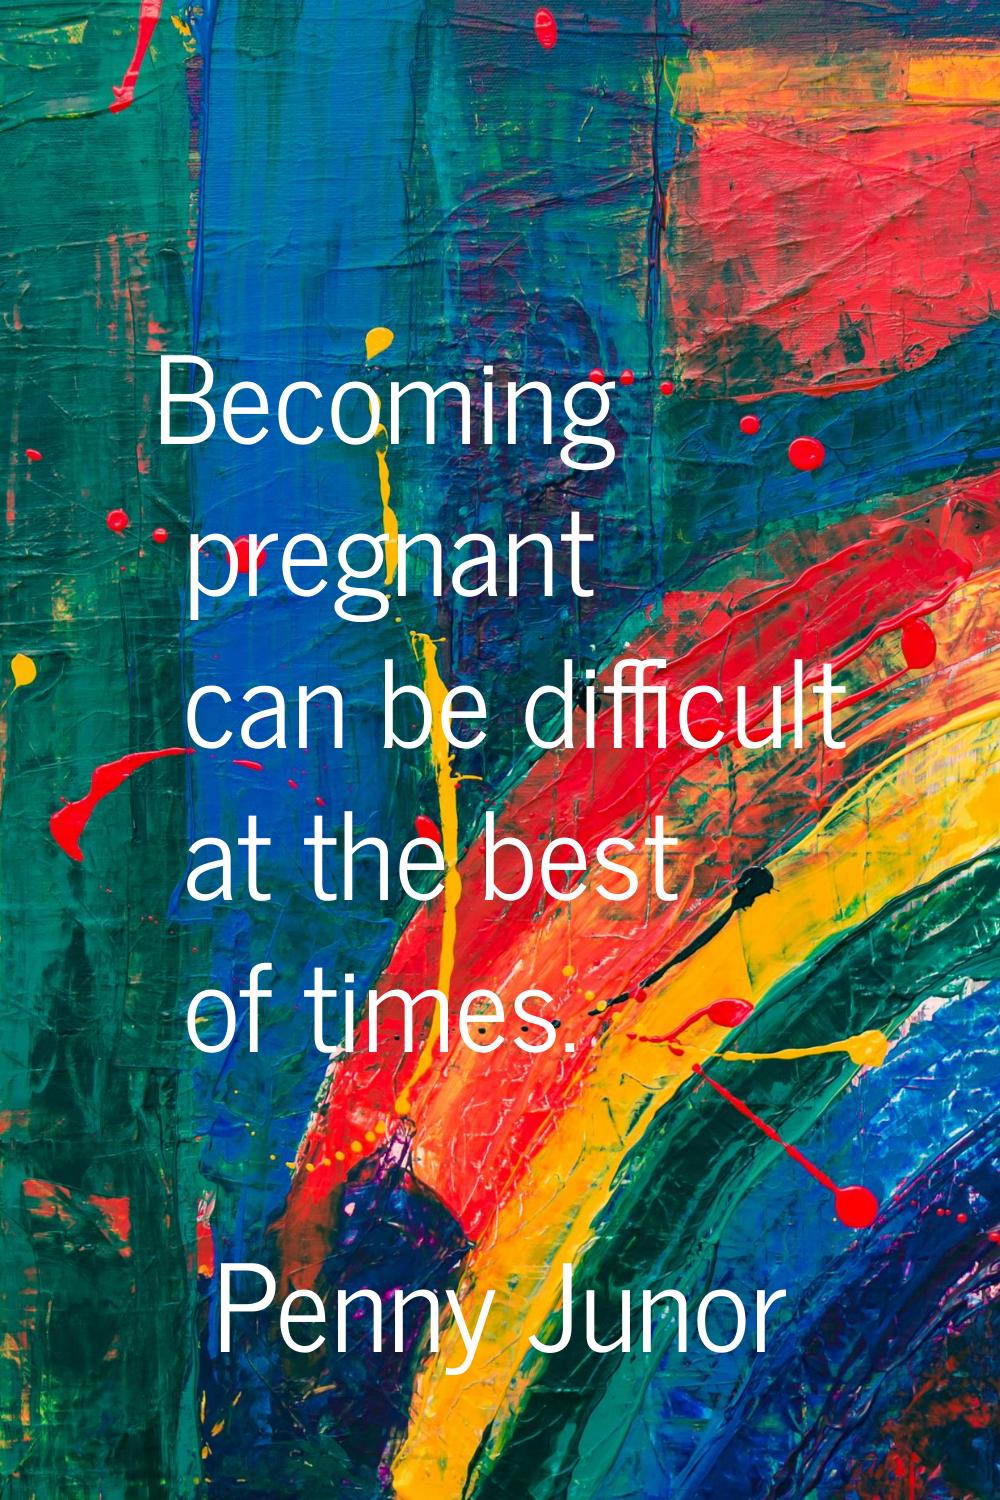 Becoming pregnant can be difficult at the best of times.